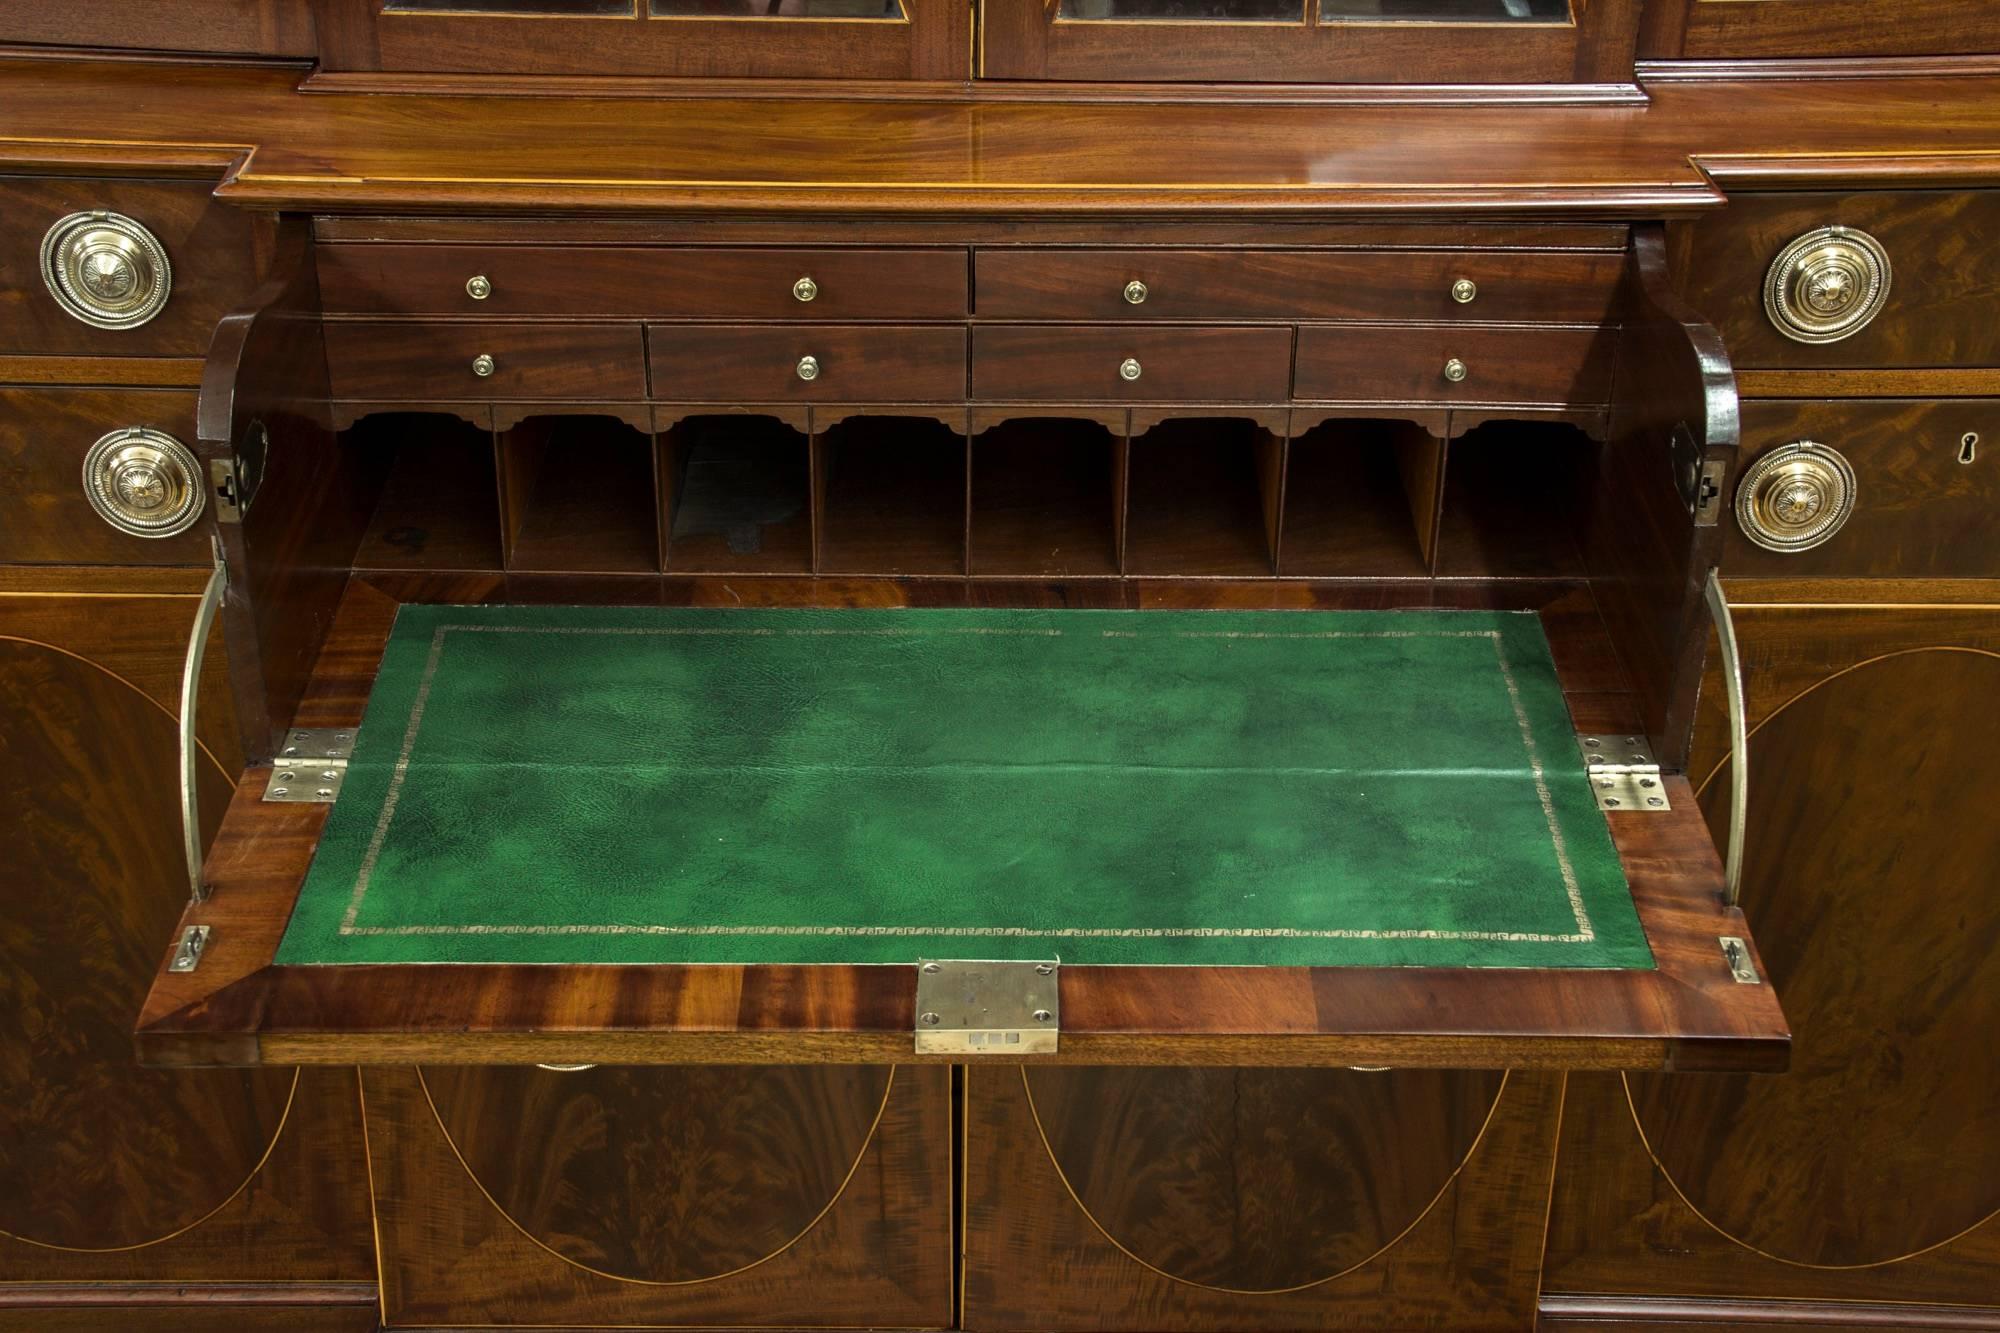 Fine Inlaid Mahogany Federal / Hepplewhite Breakfront, Rhode Island, circa 1800 In Excellent Condition For Sale In Providence, RI